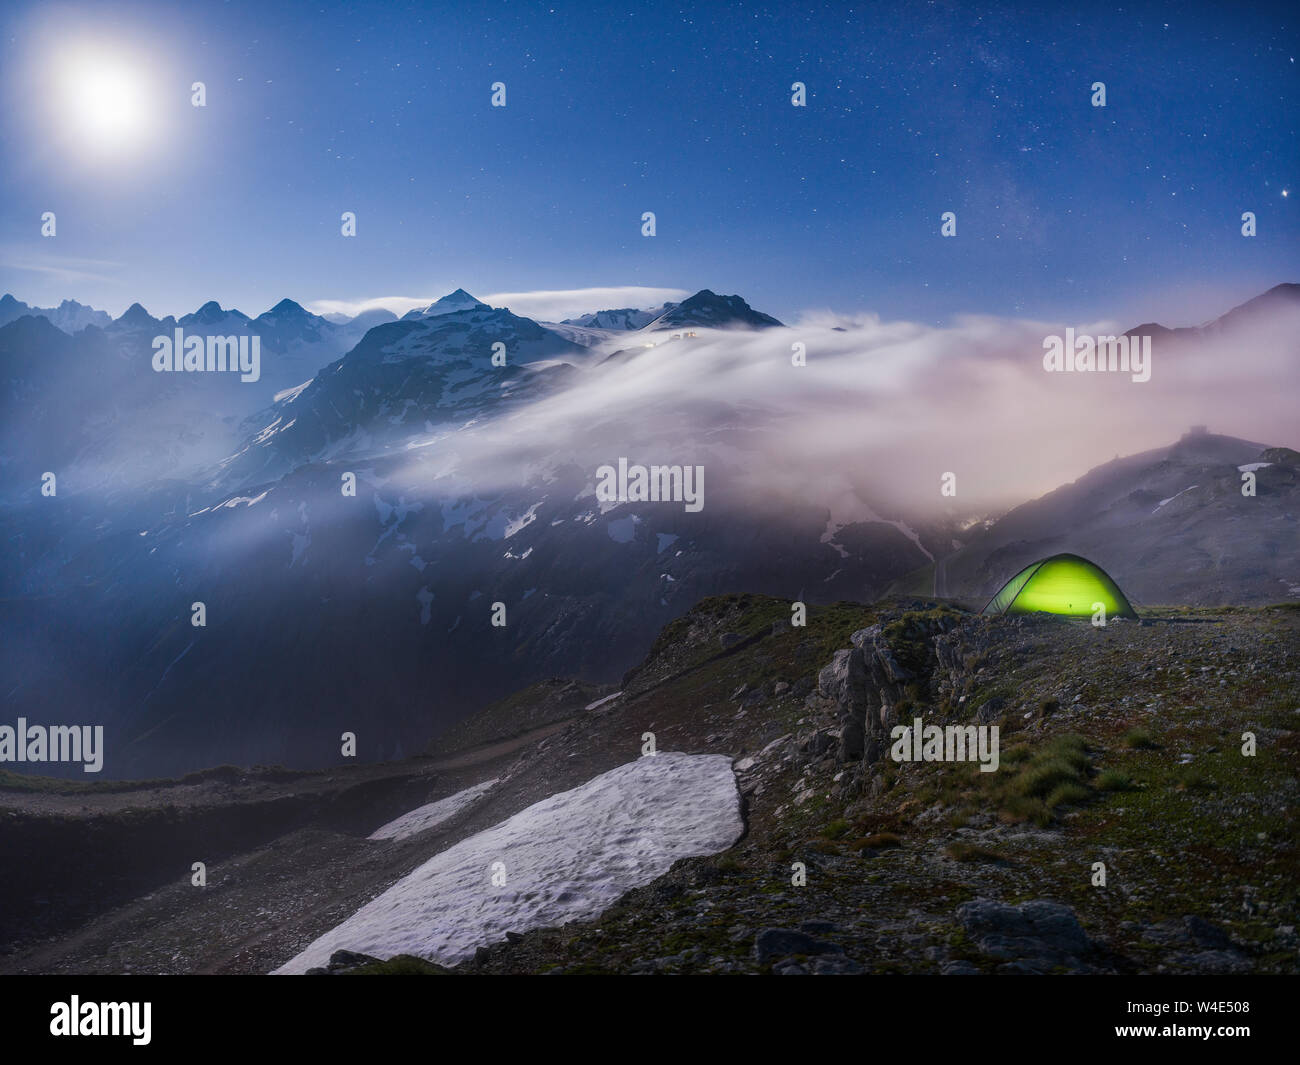 Moonlit scene with illuminated green tent under starry night - fog rolling over mountains Stock Photo